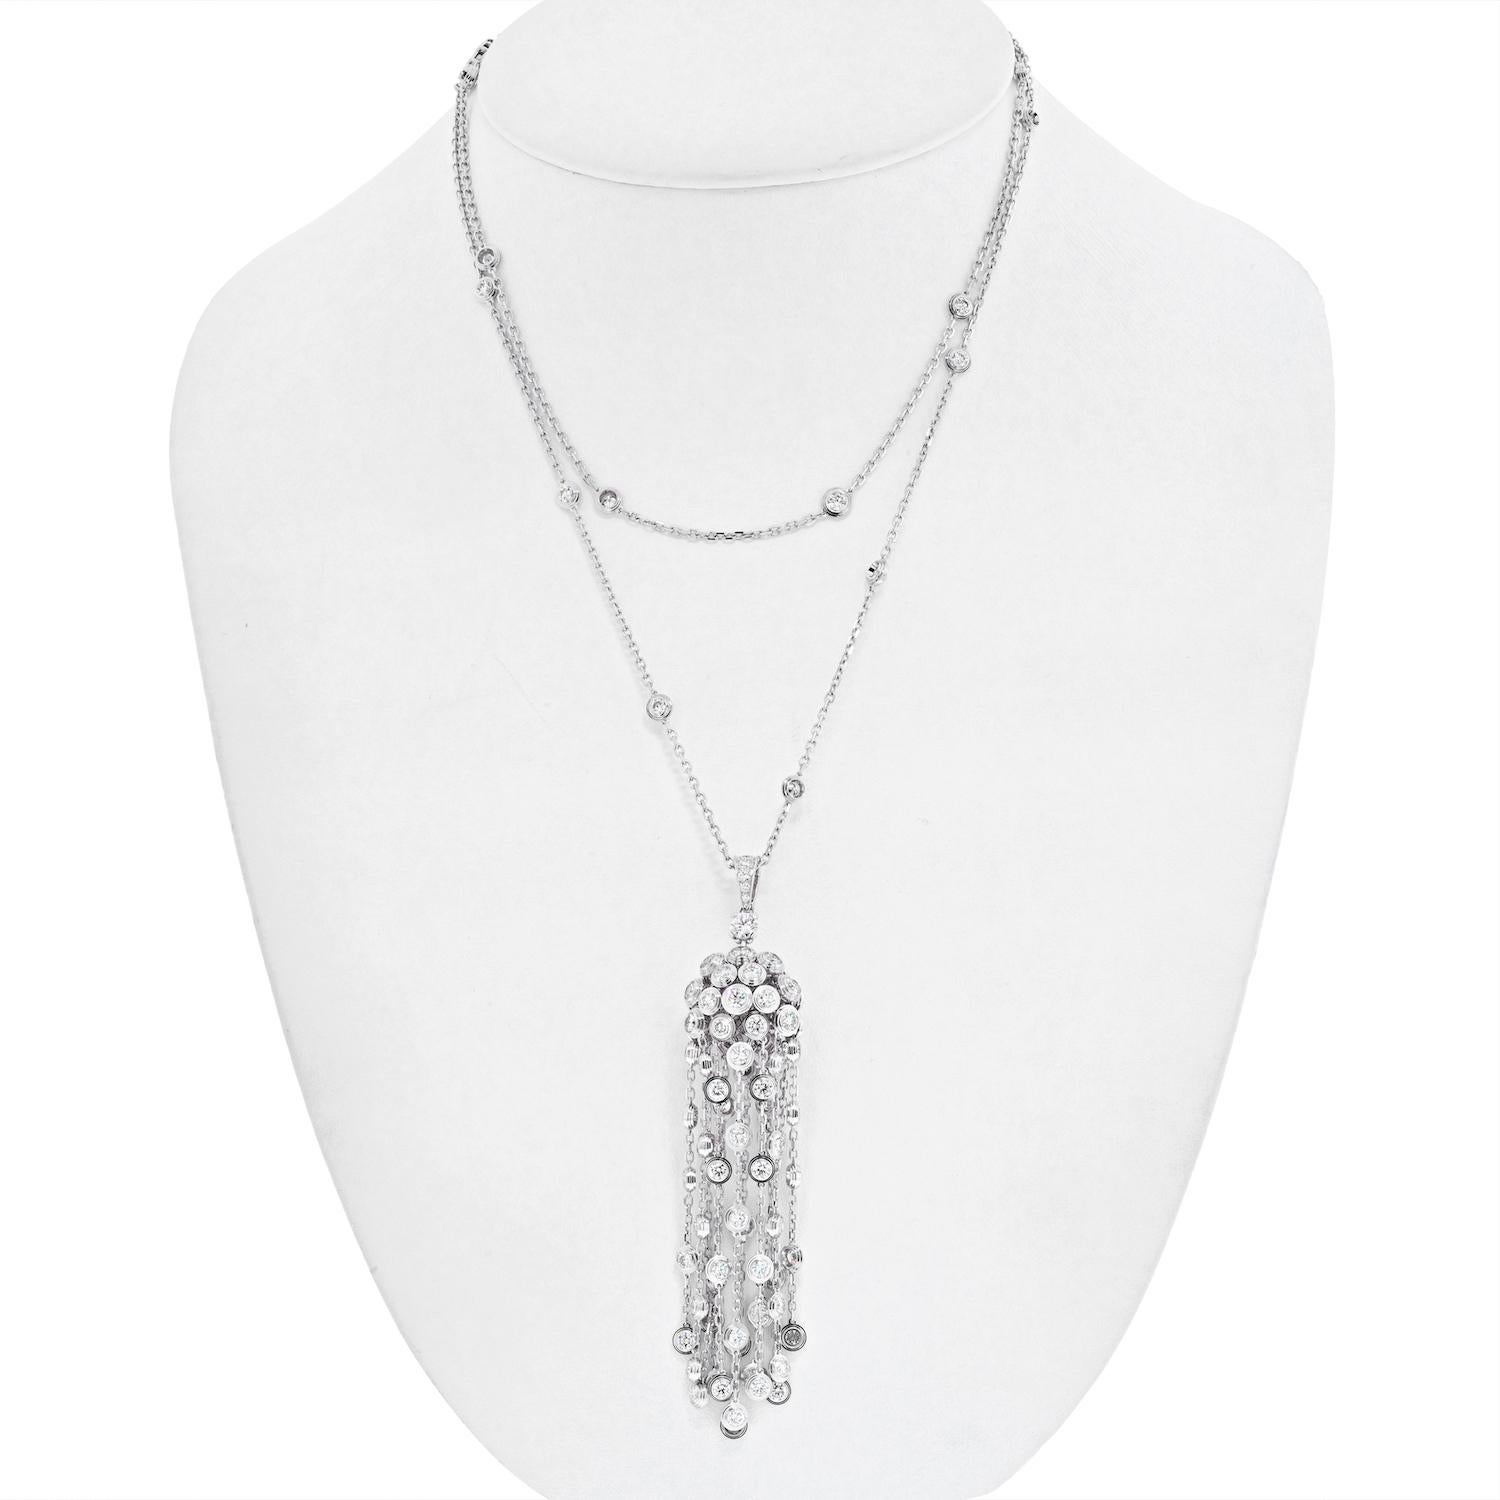 Cartier diamond jewelry is always beyond compare and especially when it comes to Cartier diamond necklaces. This model: L'egers Diamants Spotlight Necklace will add an elegant touch to your look making an unforgettable statement everywhere you go.